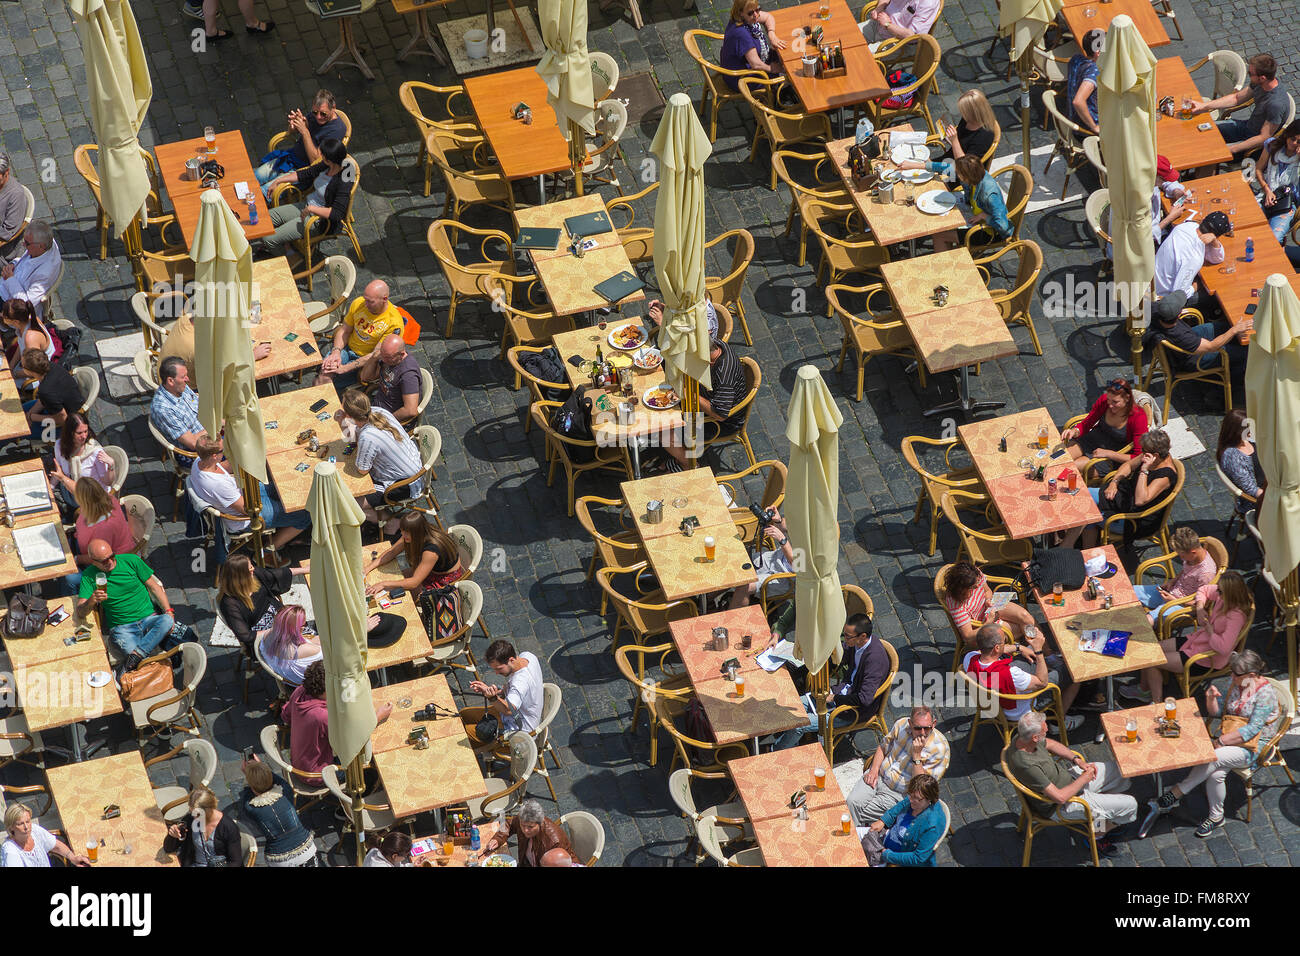 Aerial view of people at an outdoor restaurant from the Astronomical Clock Tower in Prague, Czech Republic. Stock Photo